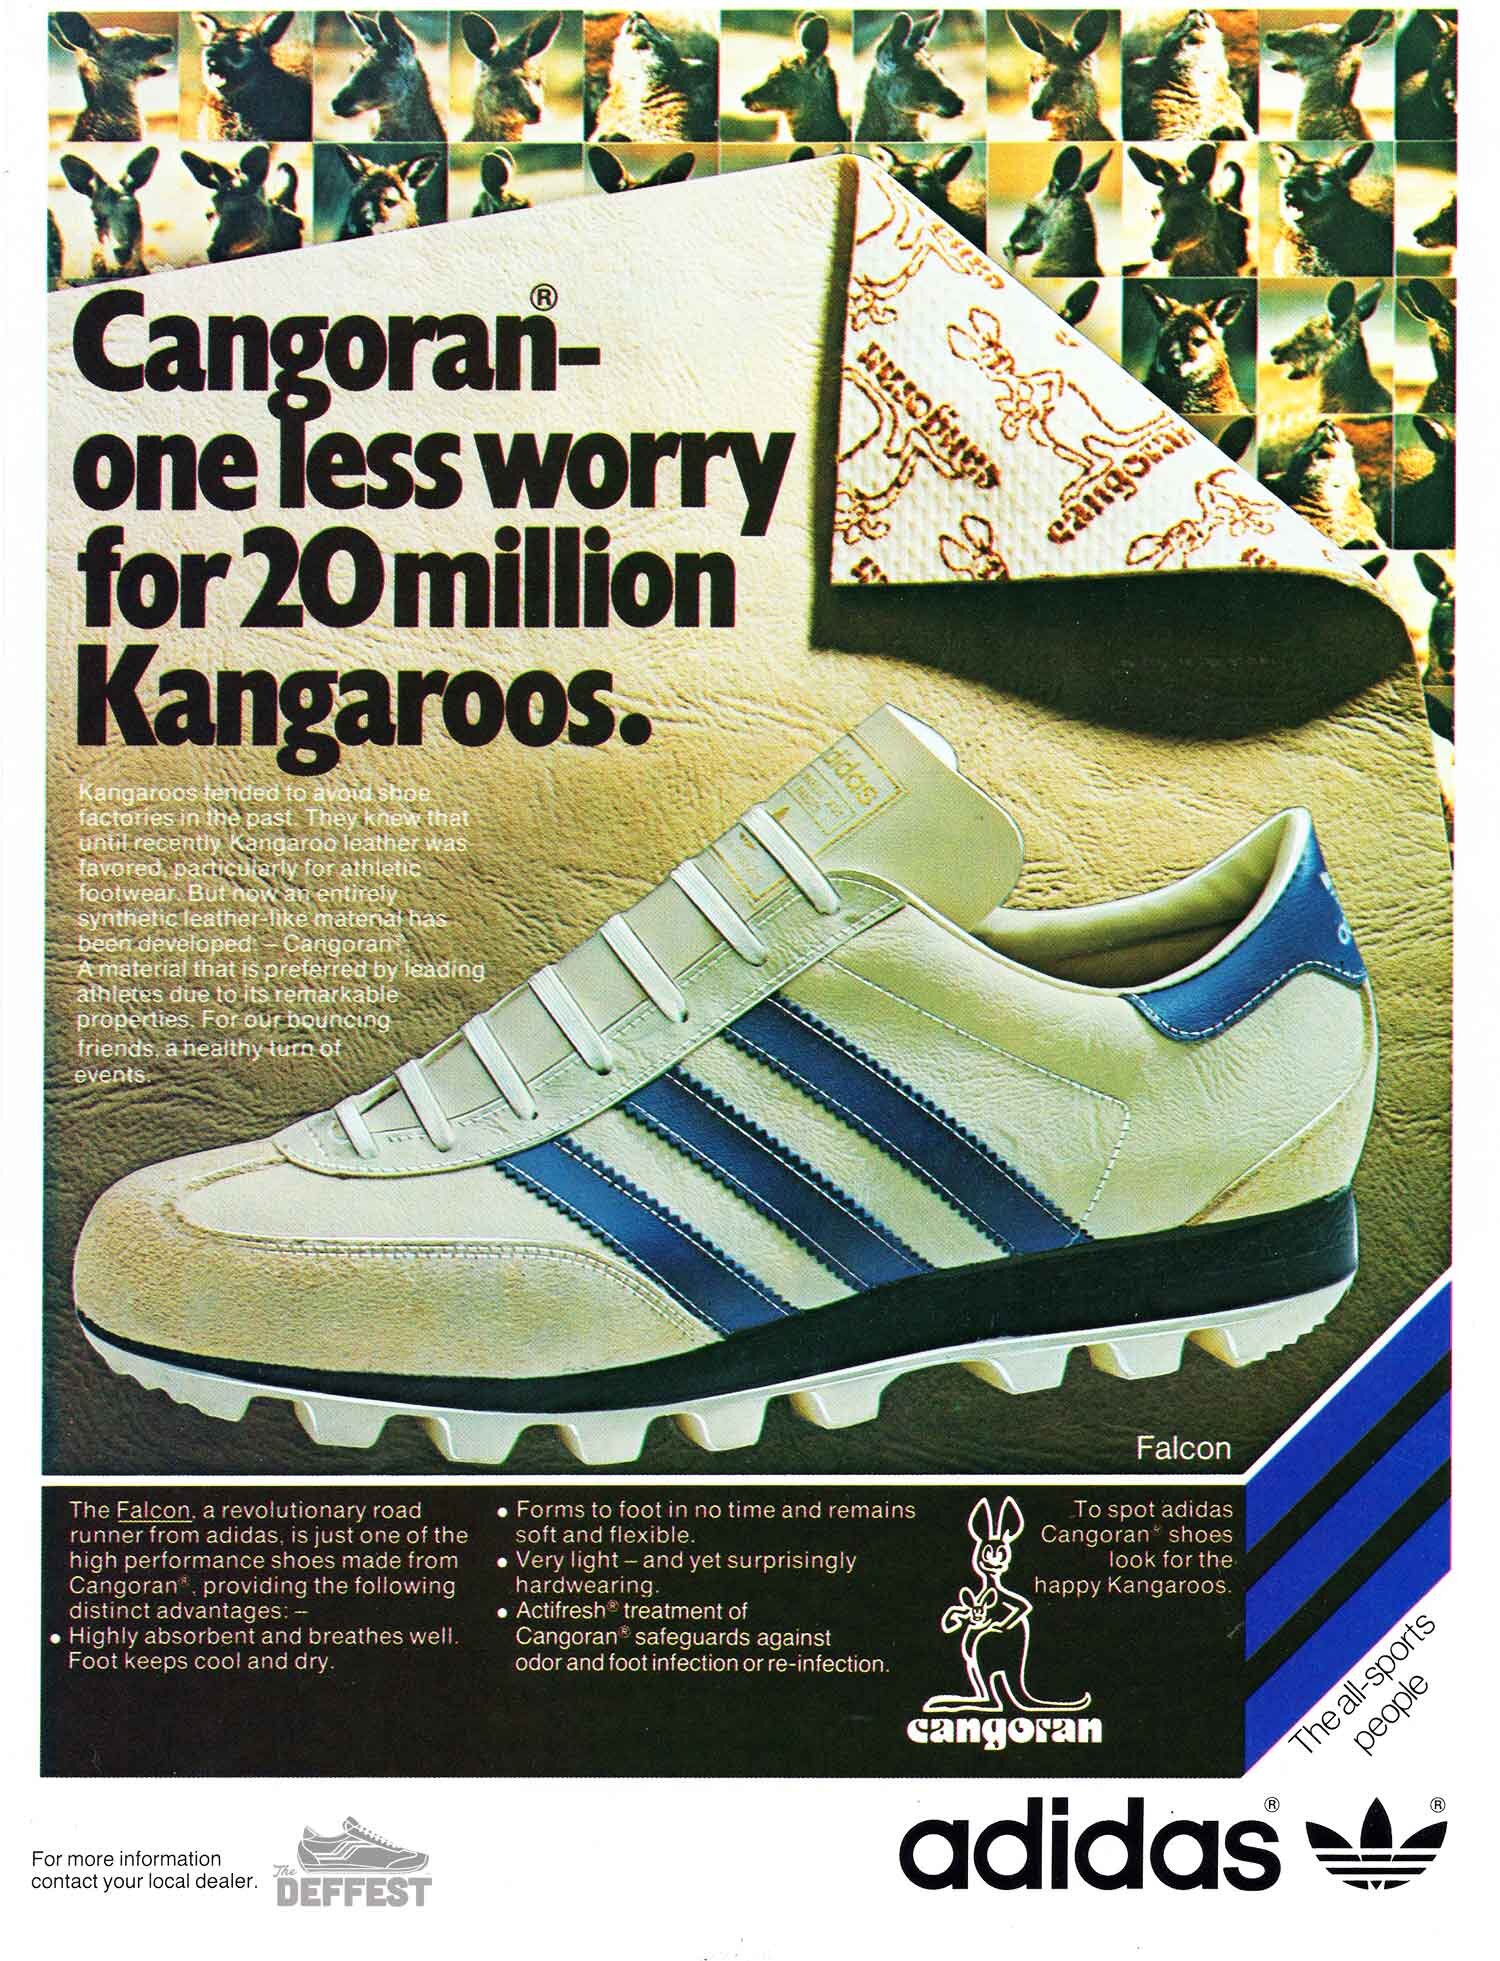 The Deffest®. A vintage and retro sneaker blog. — Adidas 1970s vintage sneaker ad